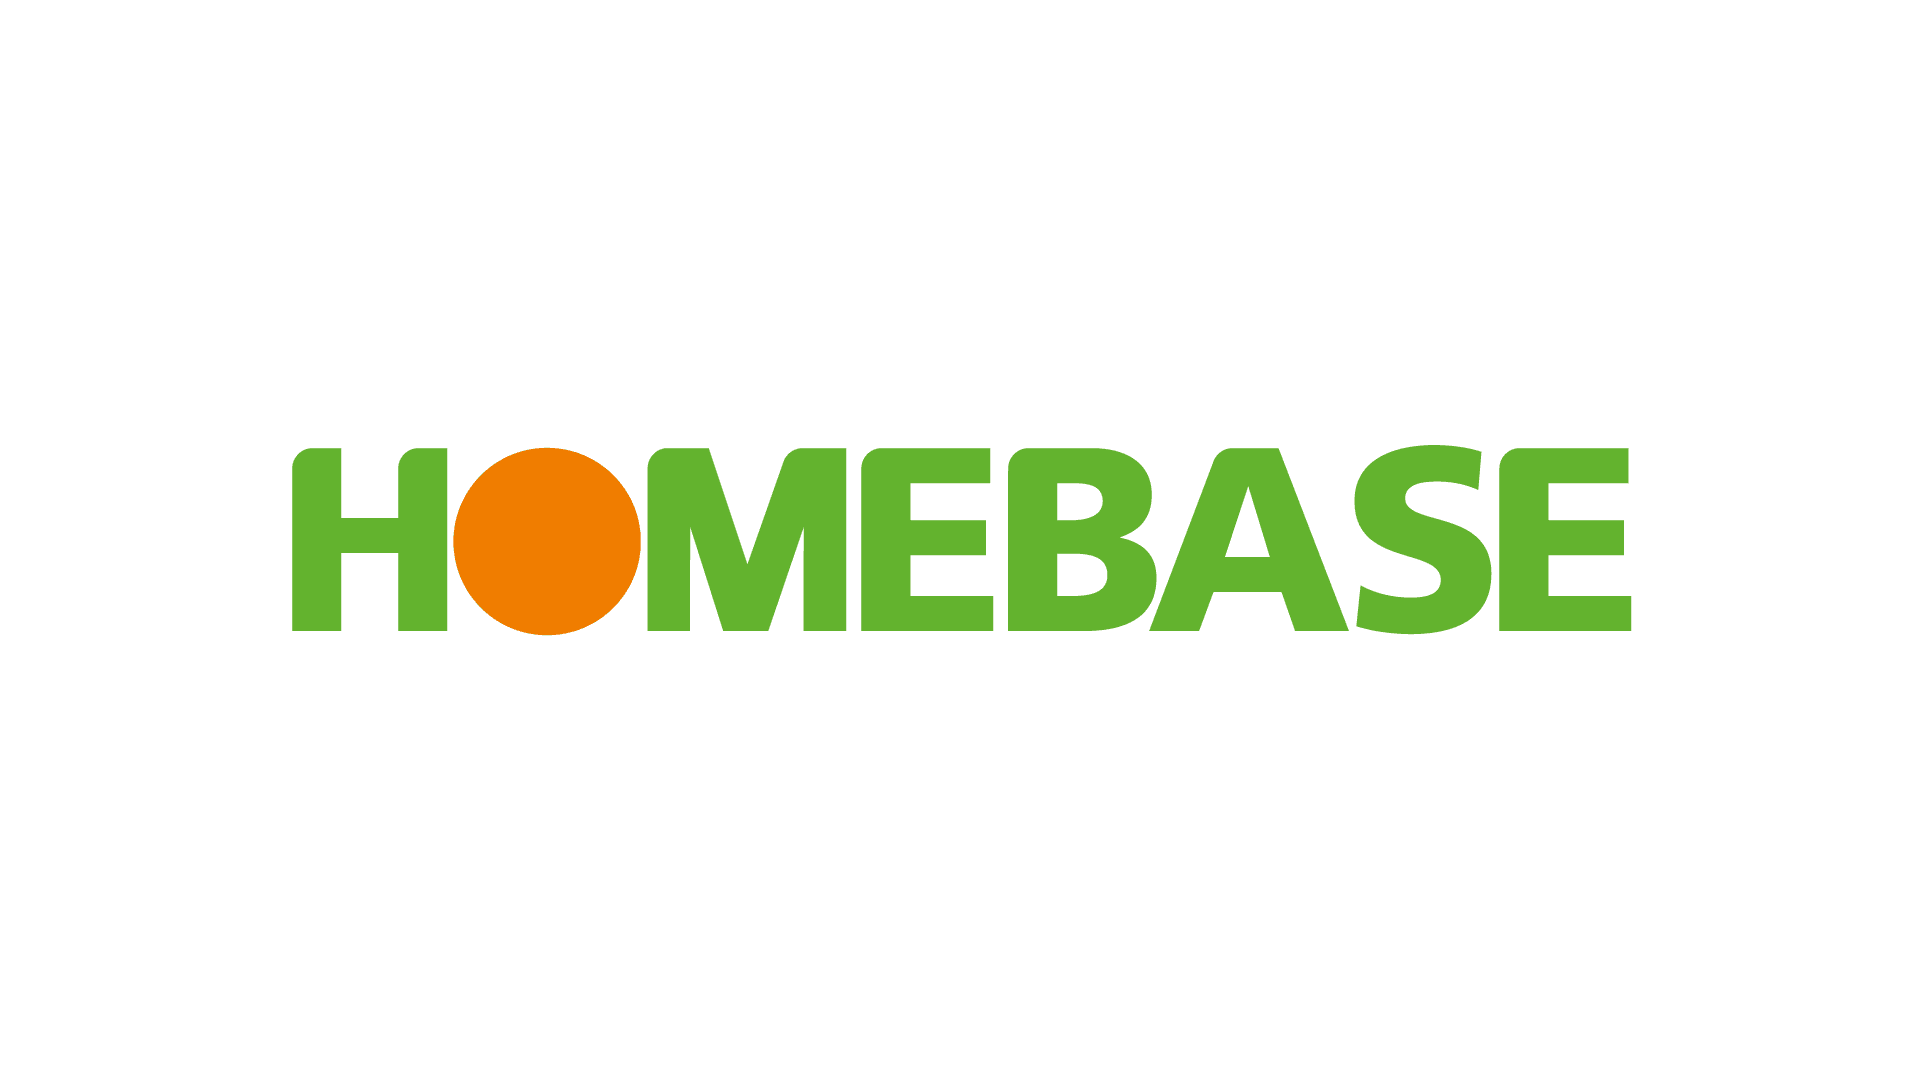 Homebase works with CADS